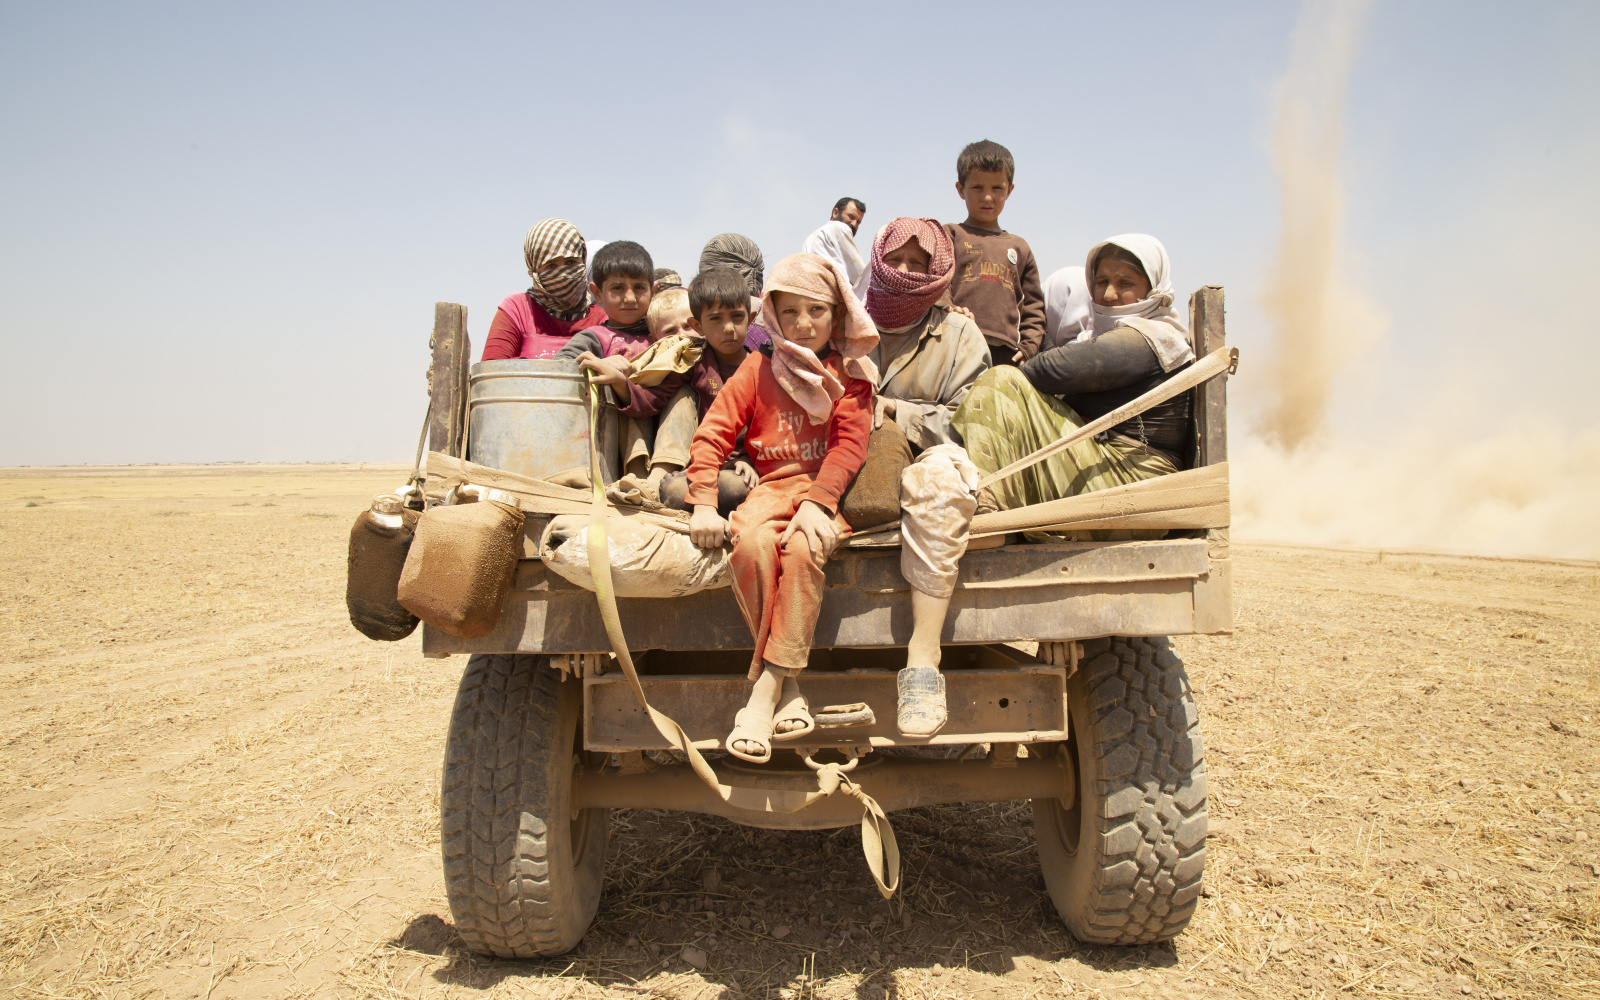 You can see many refugee children in the desert on a truck.